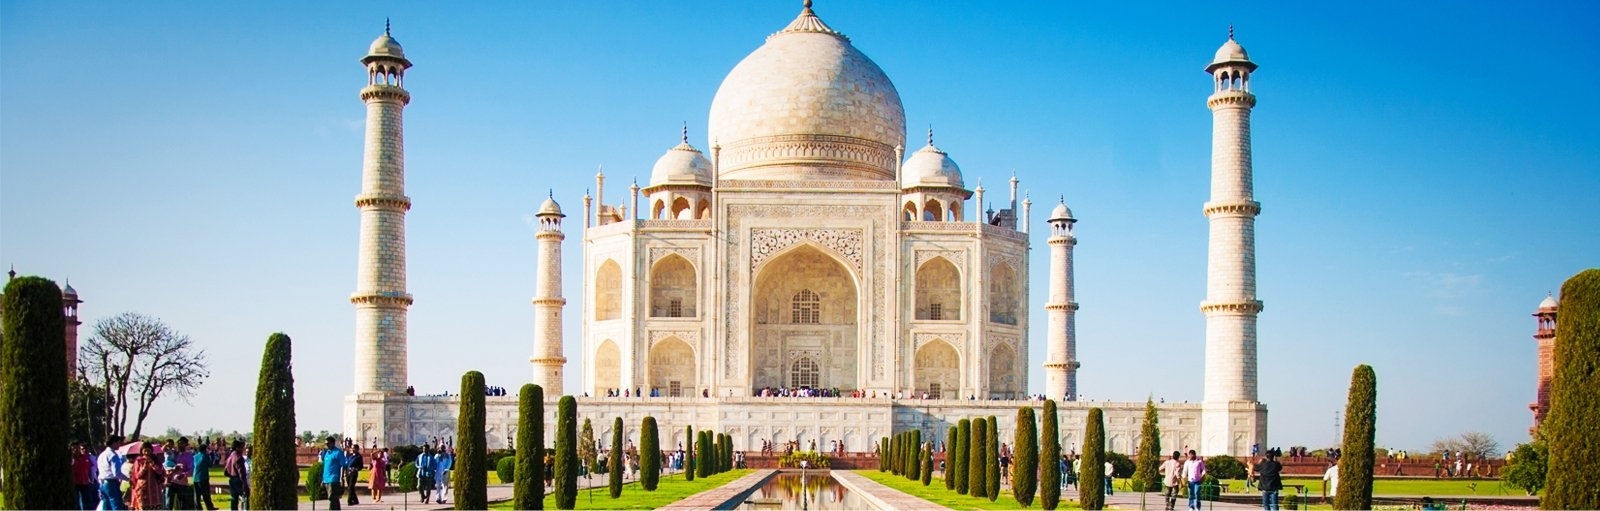 Golden Triangle Travel Package of India